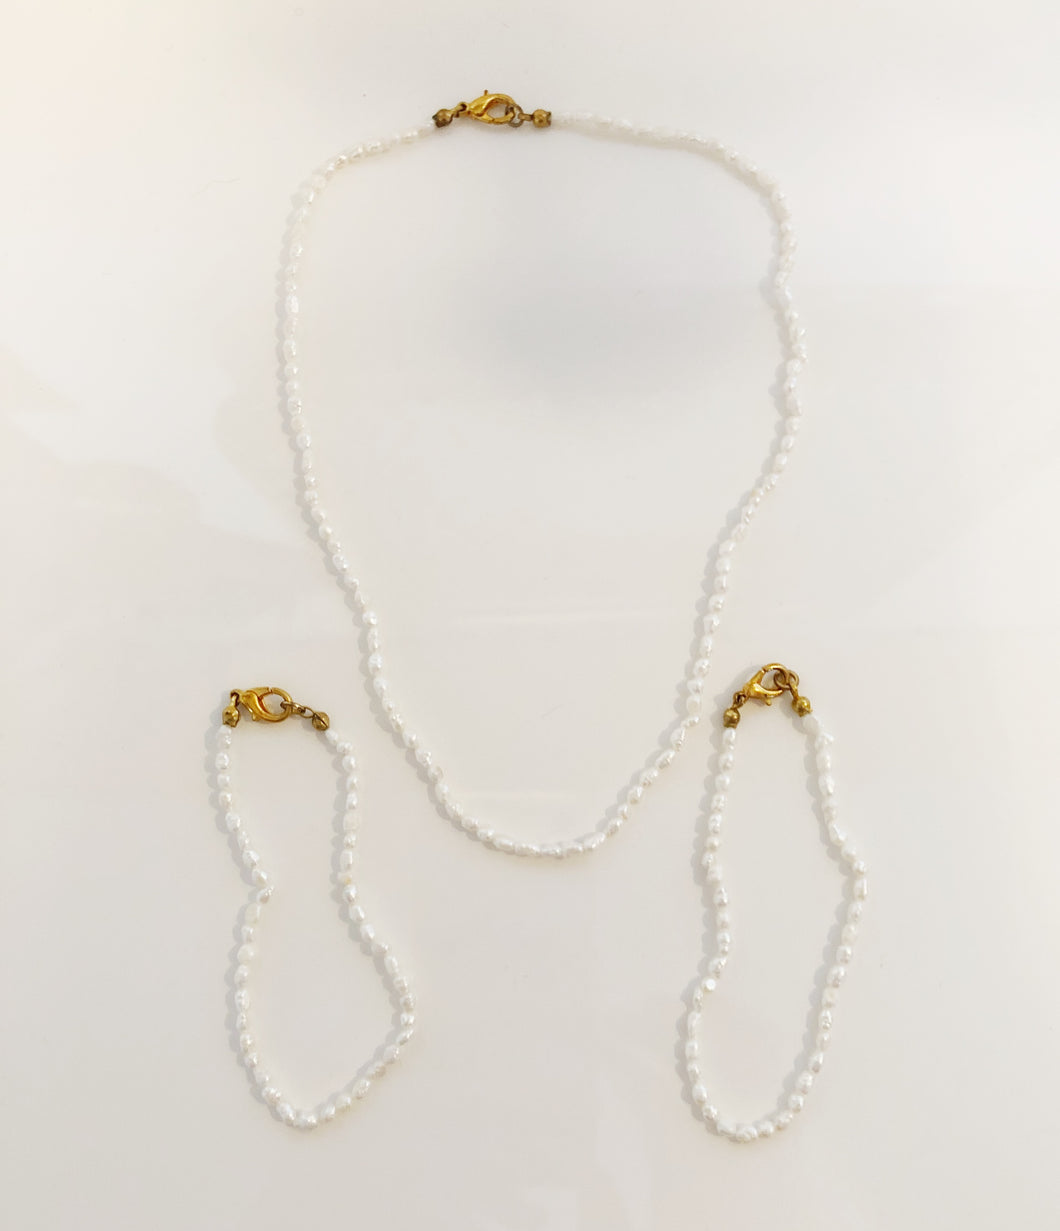 Vintage Freshwater Pearl Necklace with Two Matching Bracelets